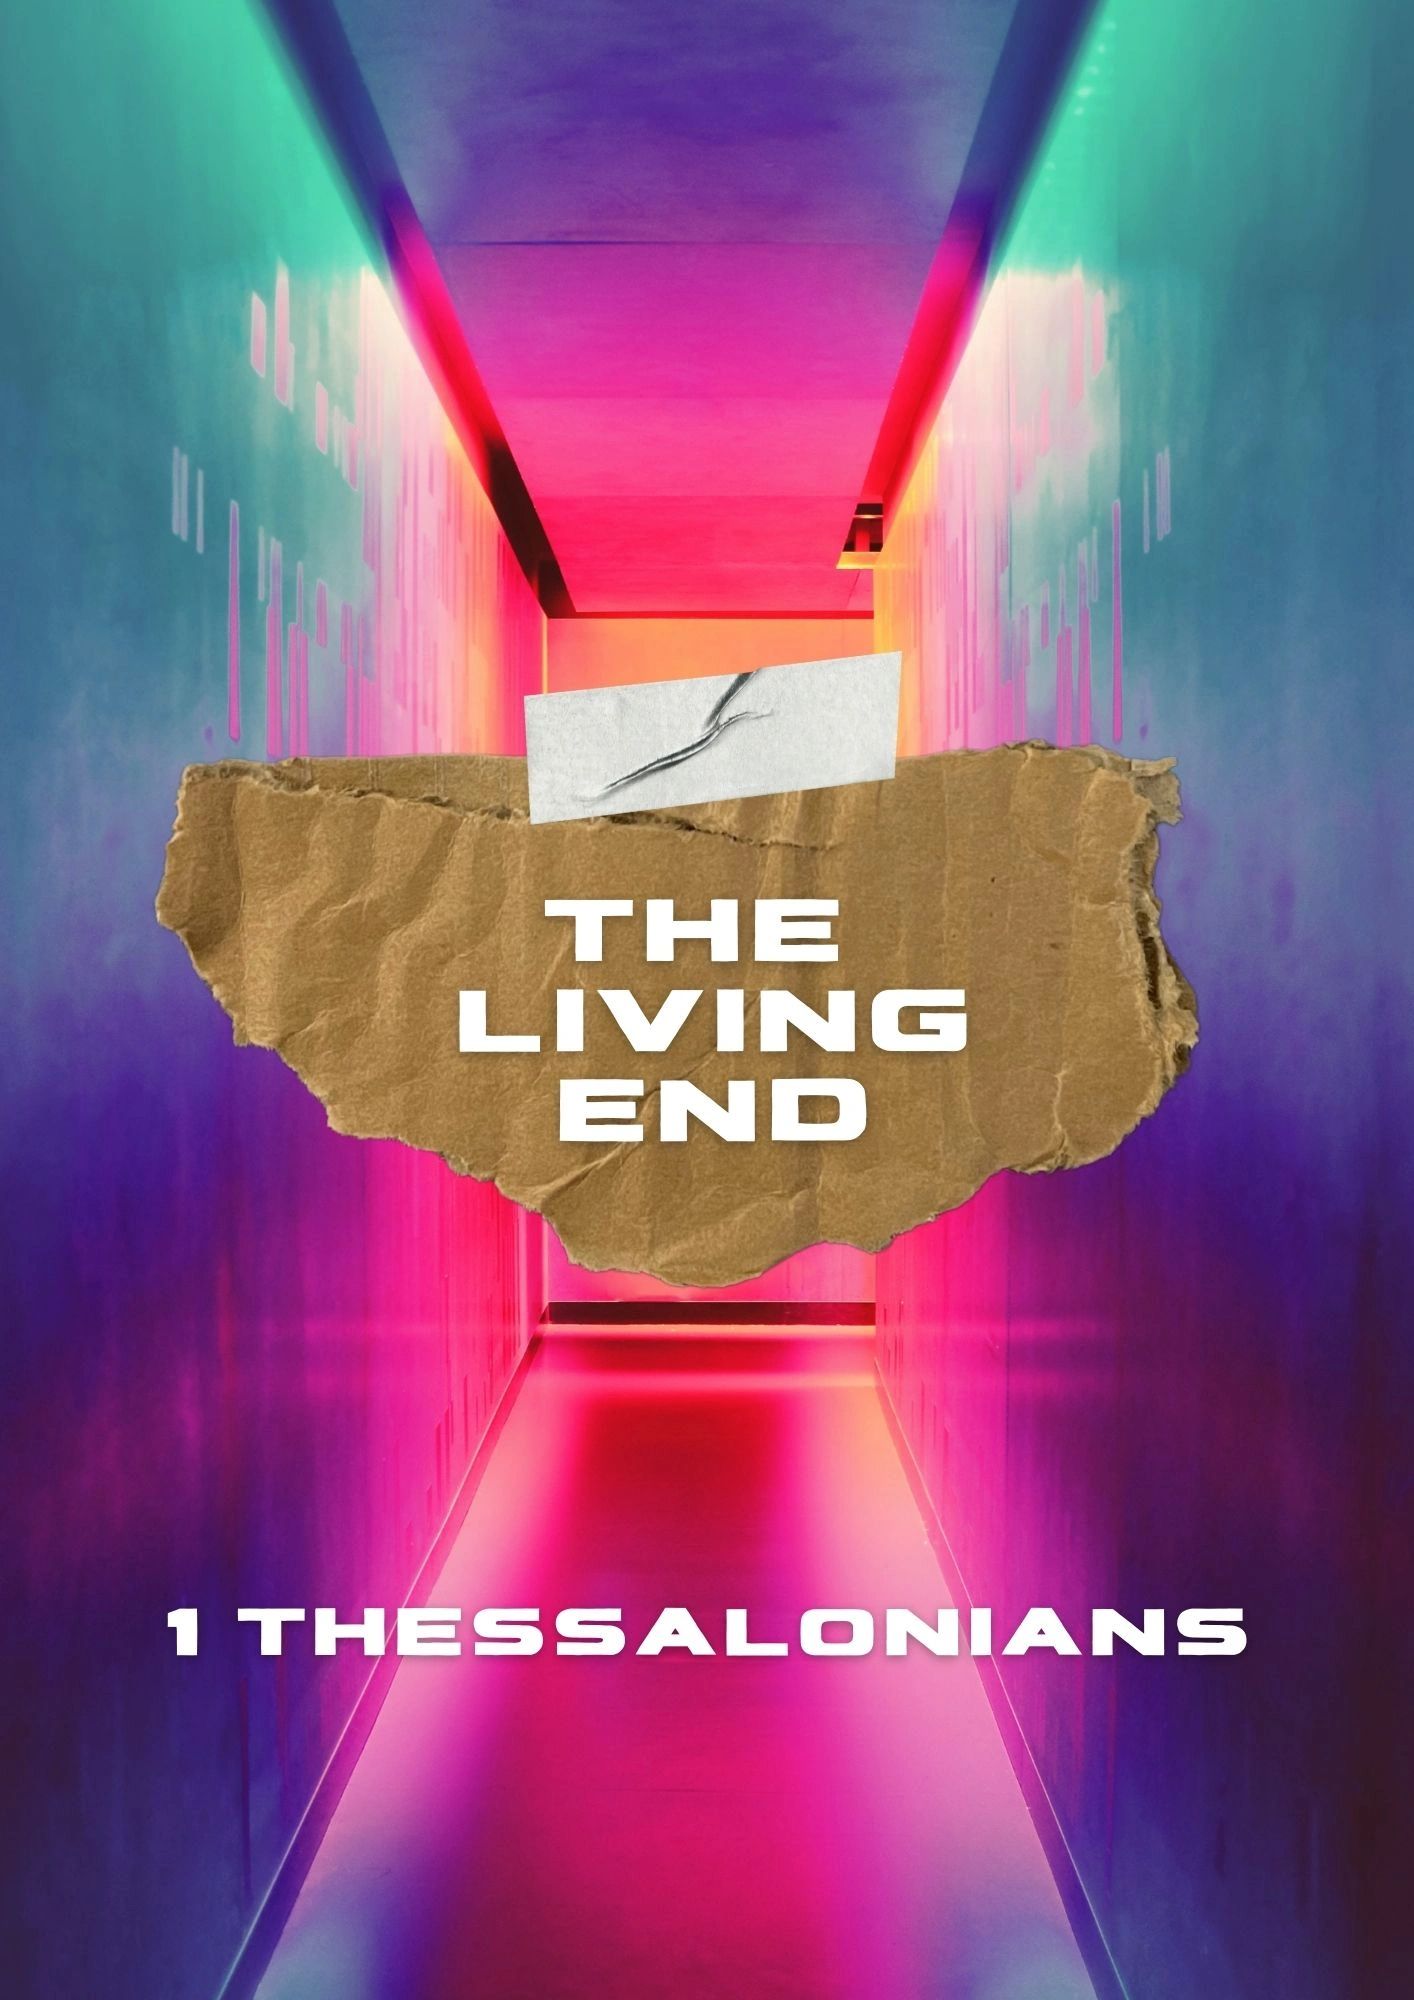 The Living End - A 5 week study of 1 Thessalonians